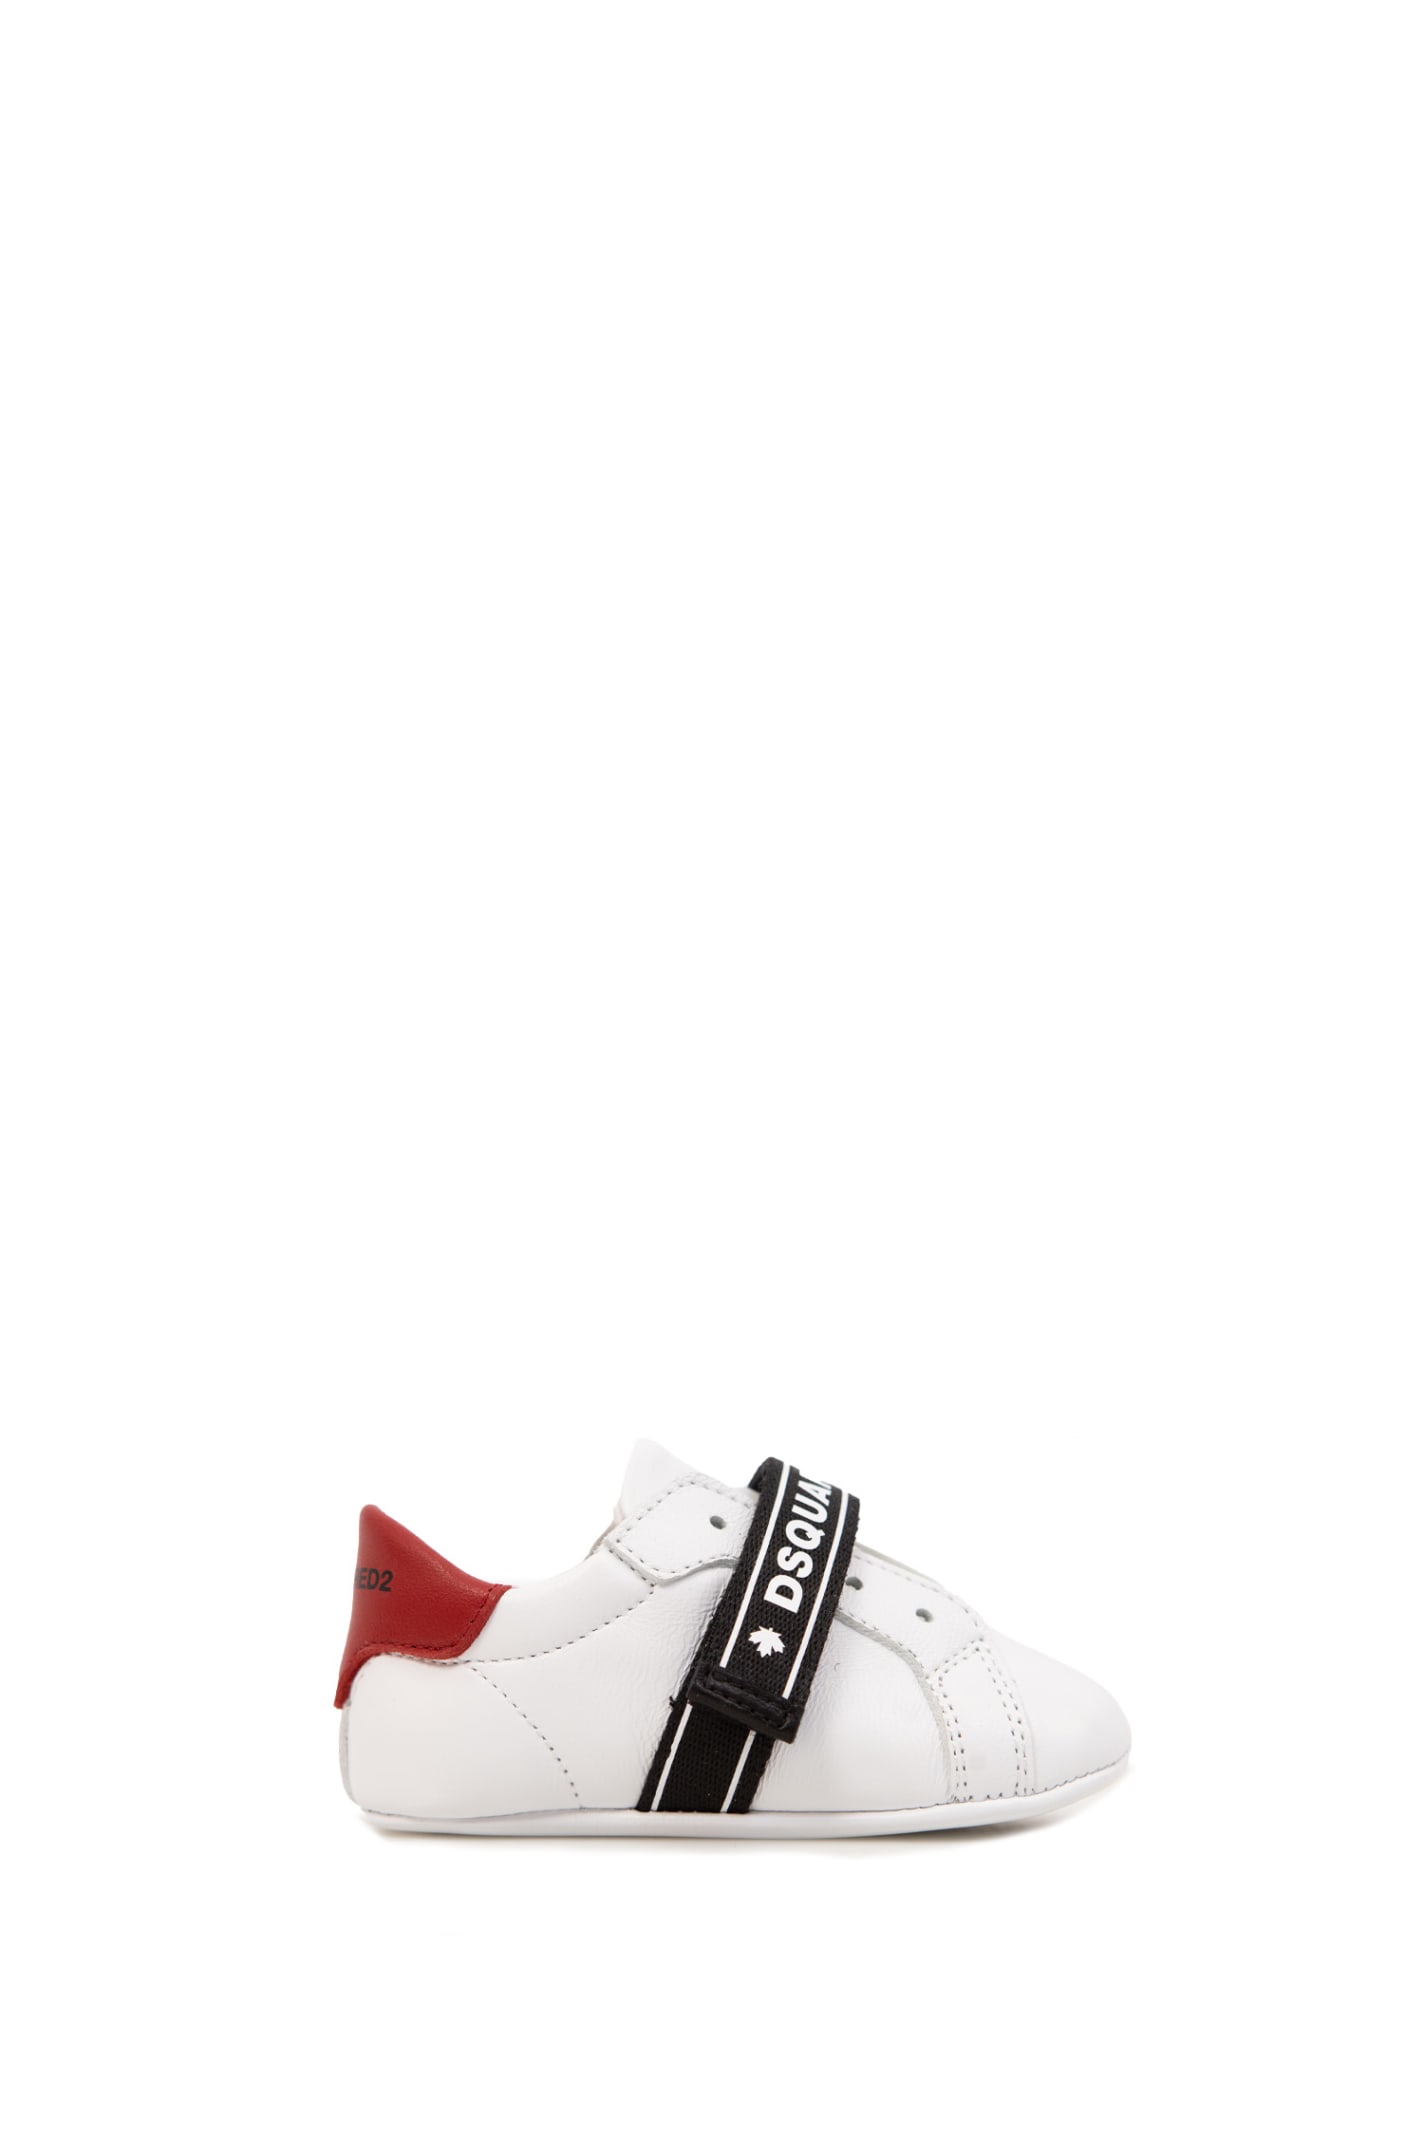 Dsquared2 Kids' First Steps Shoes In White